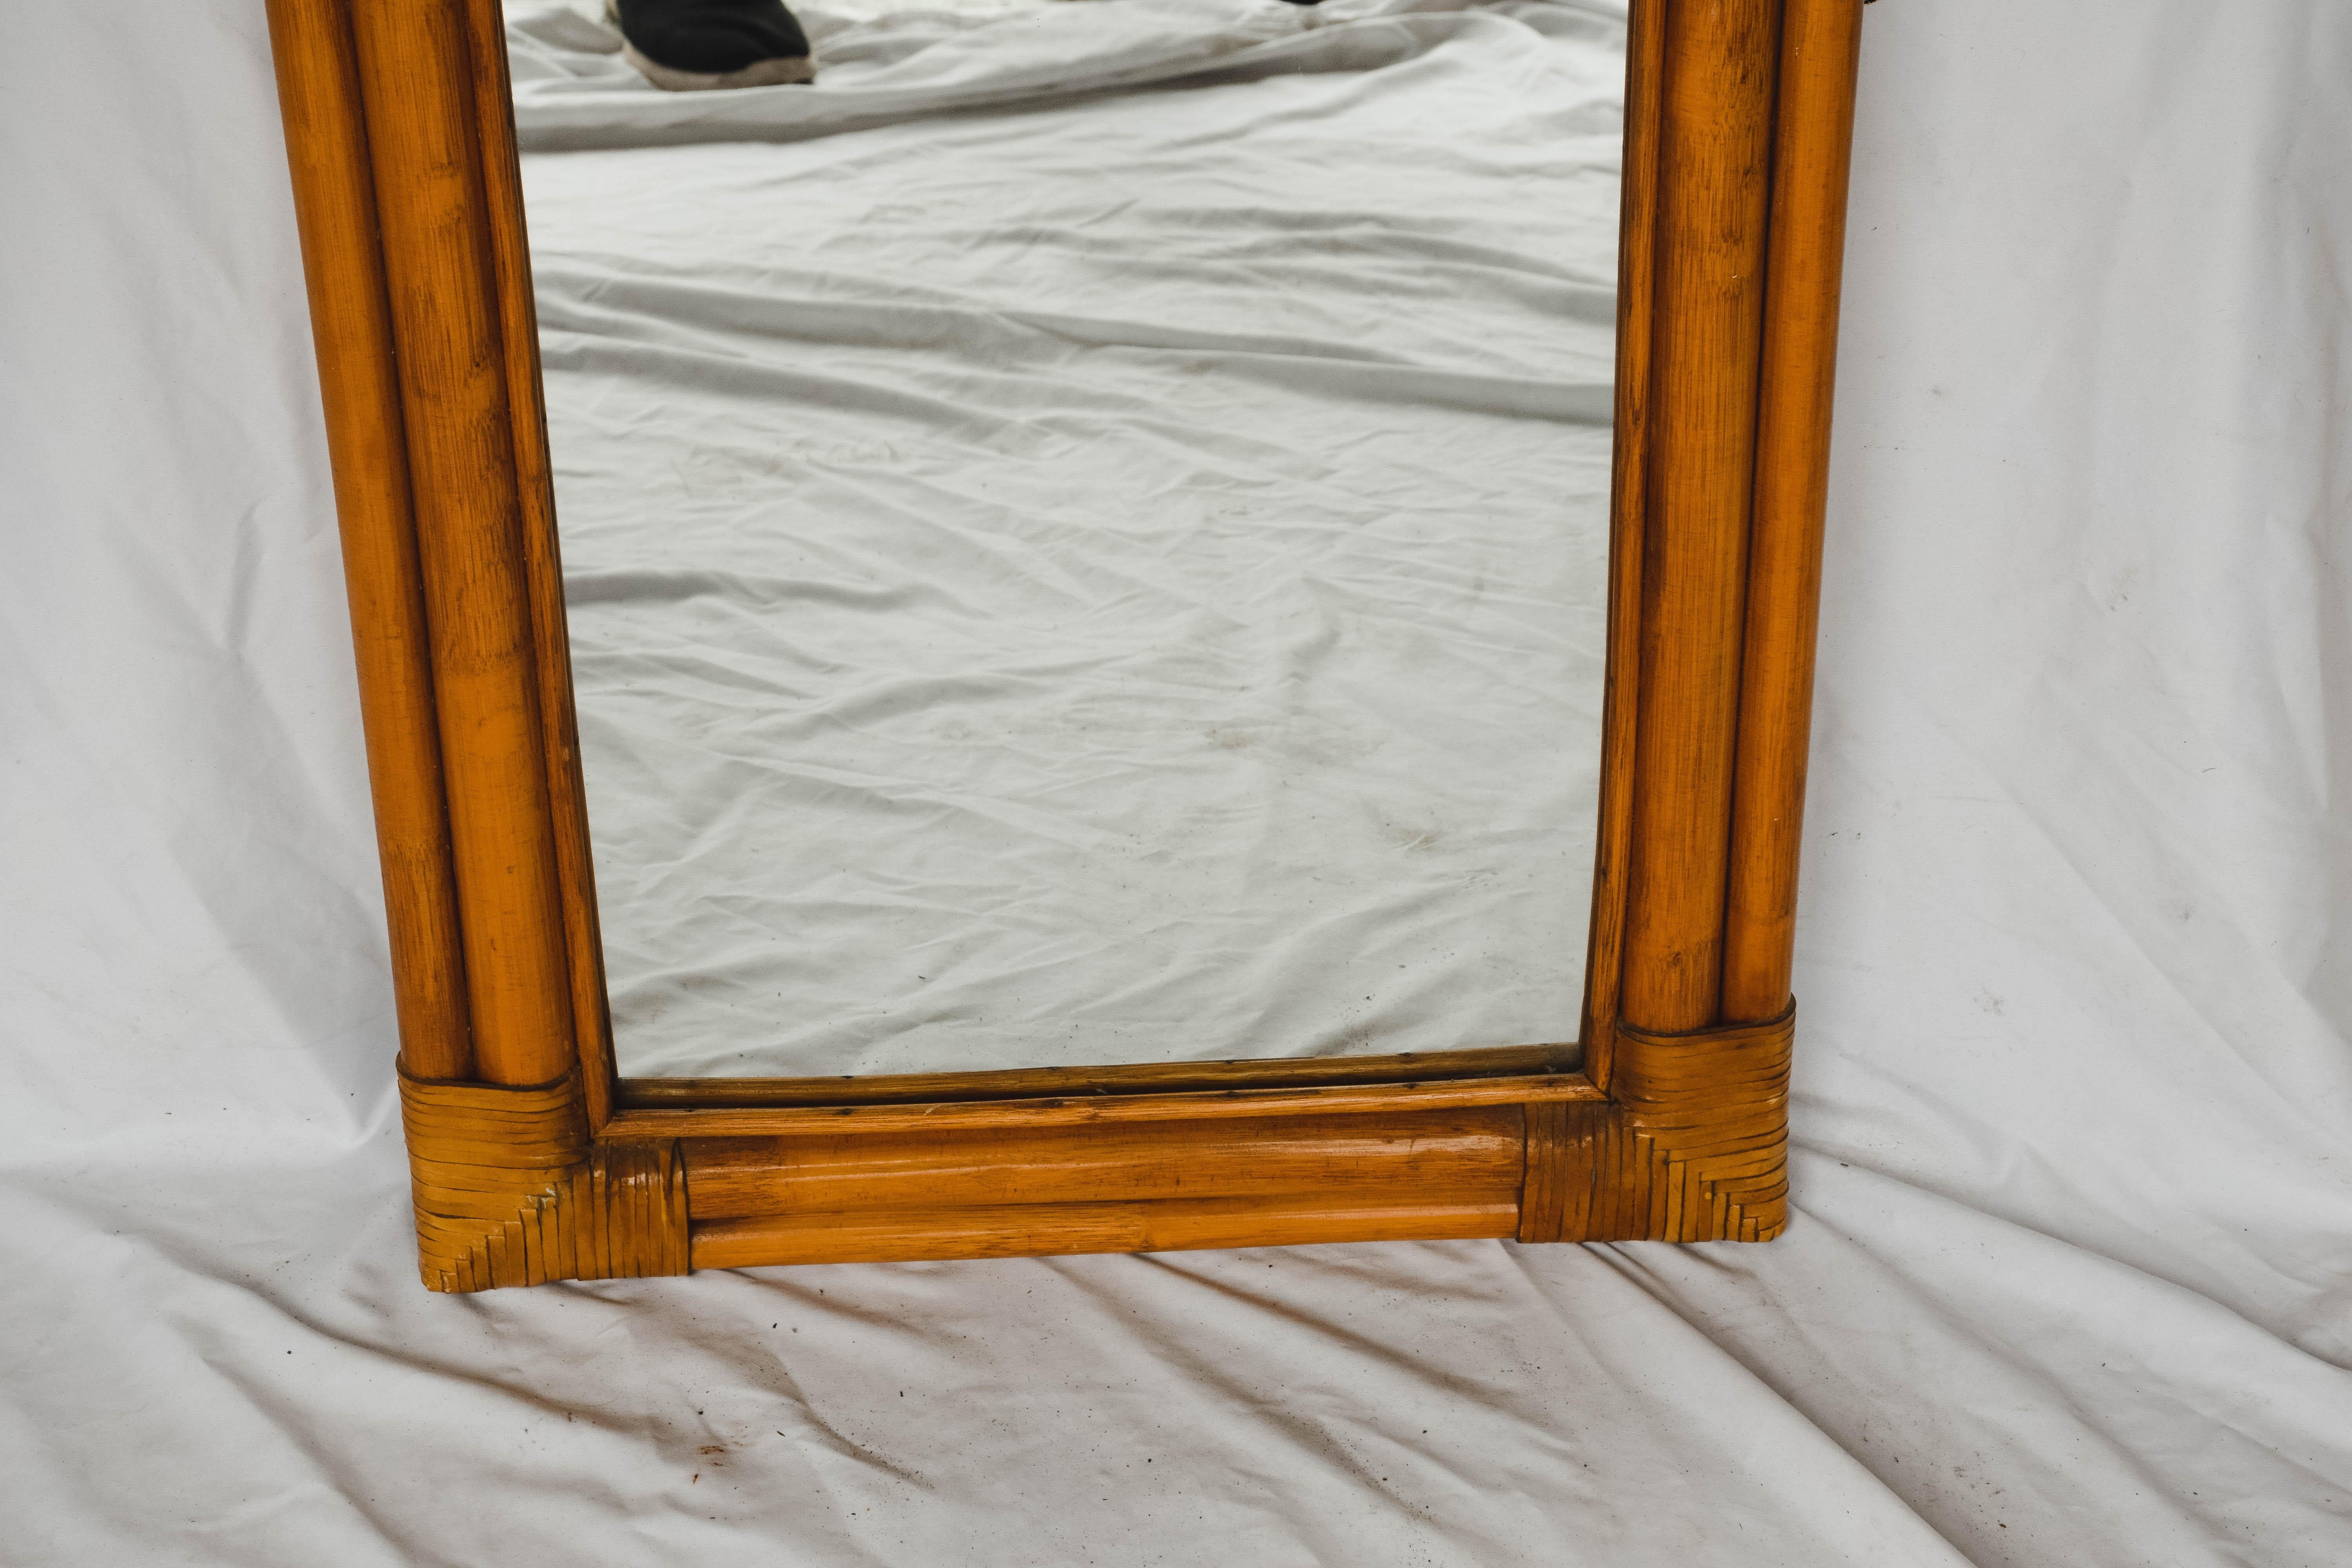 Rectangular bamboo mirror circa 1950. Well-preserved condition. Dimensions: 67 1/2